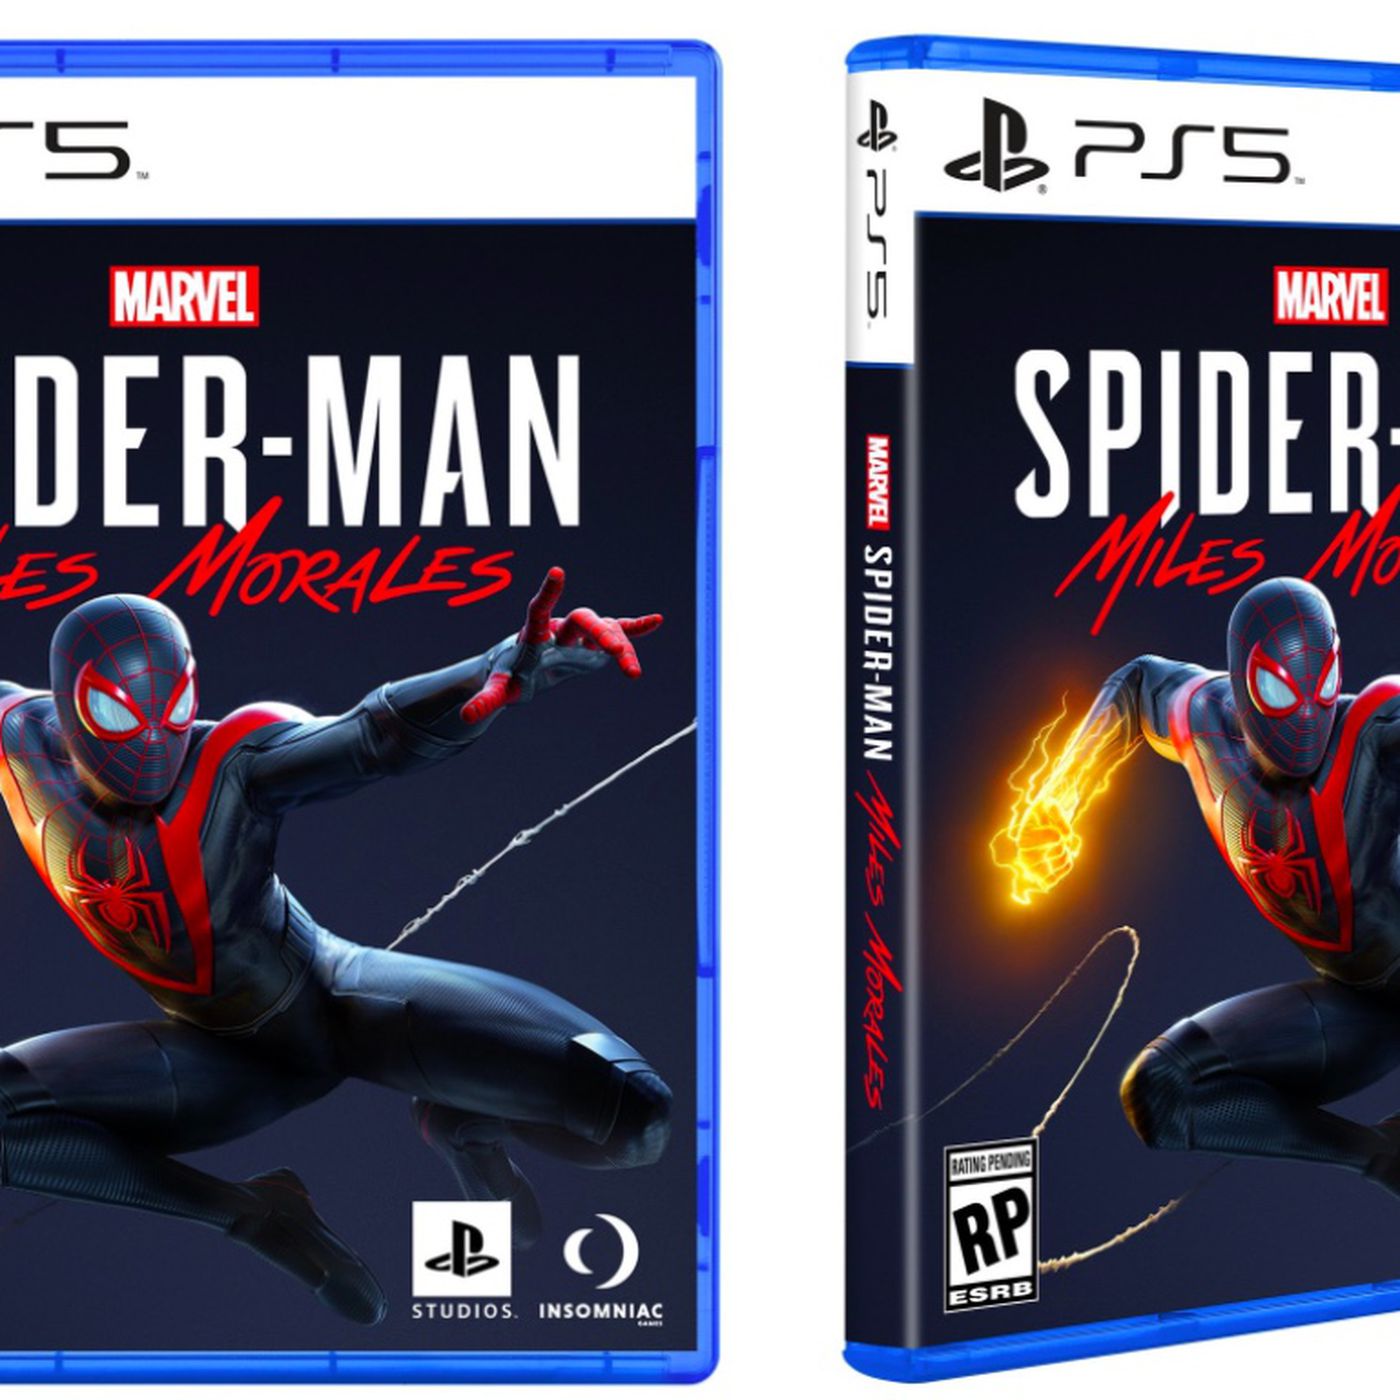 PlayStation 5: First PS5 game box art for Spider-Man Miles Morales Polygon